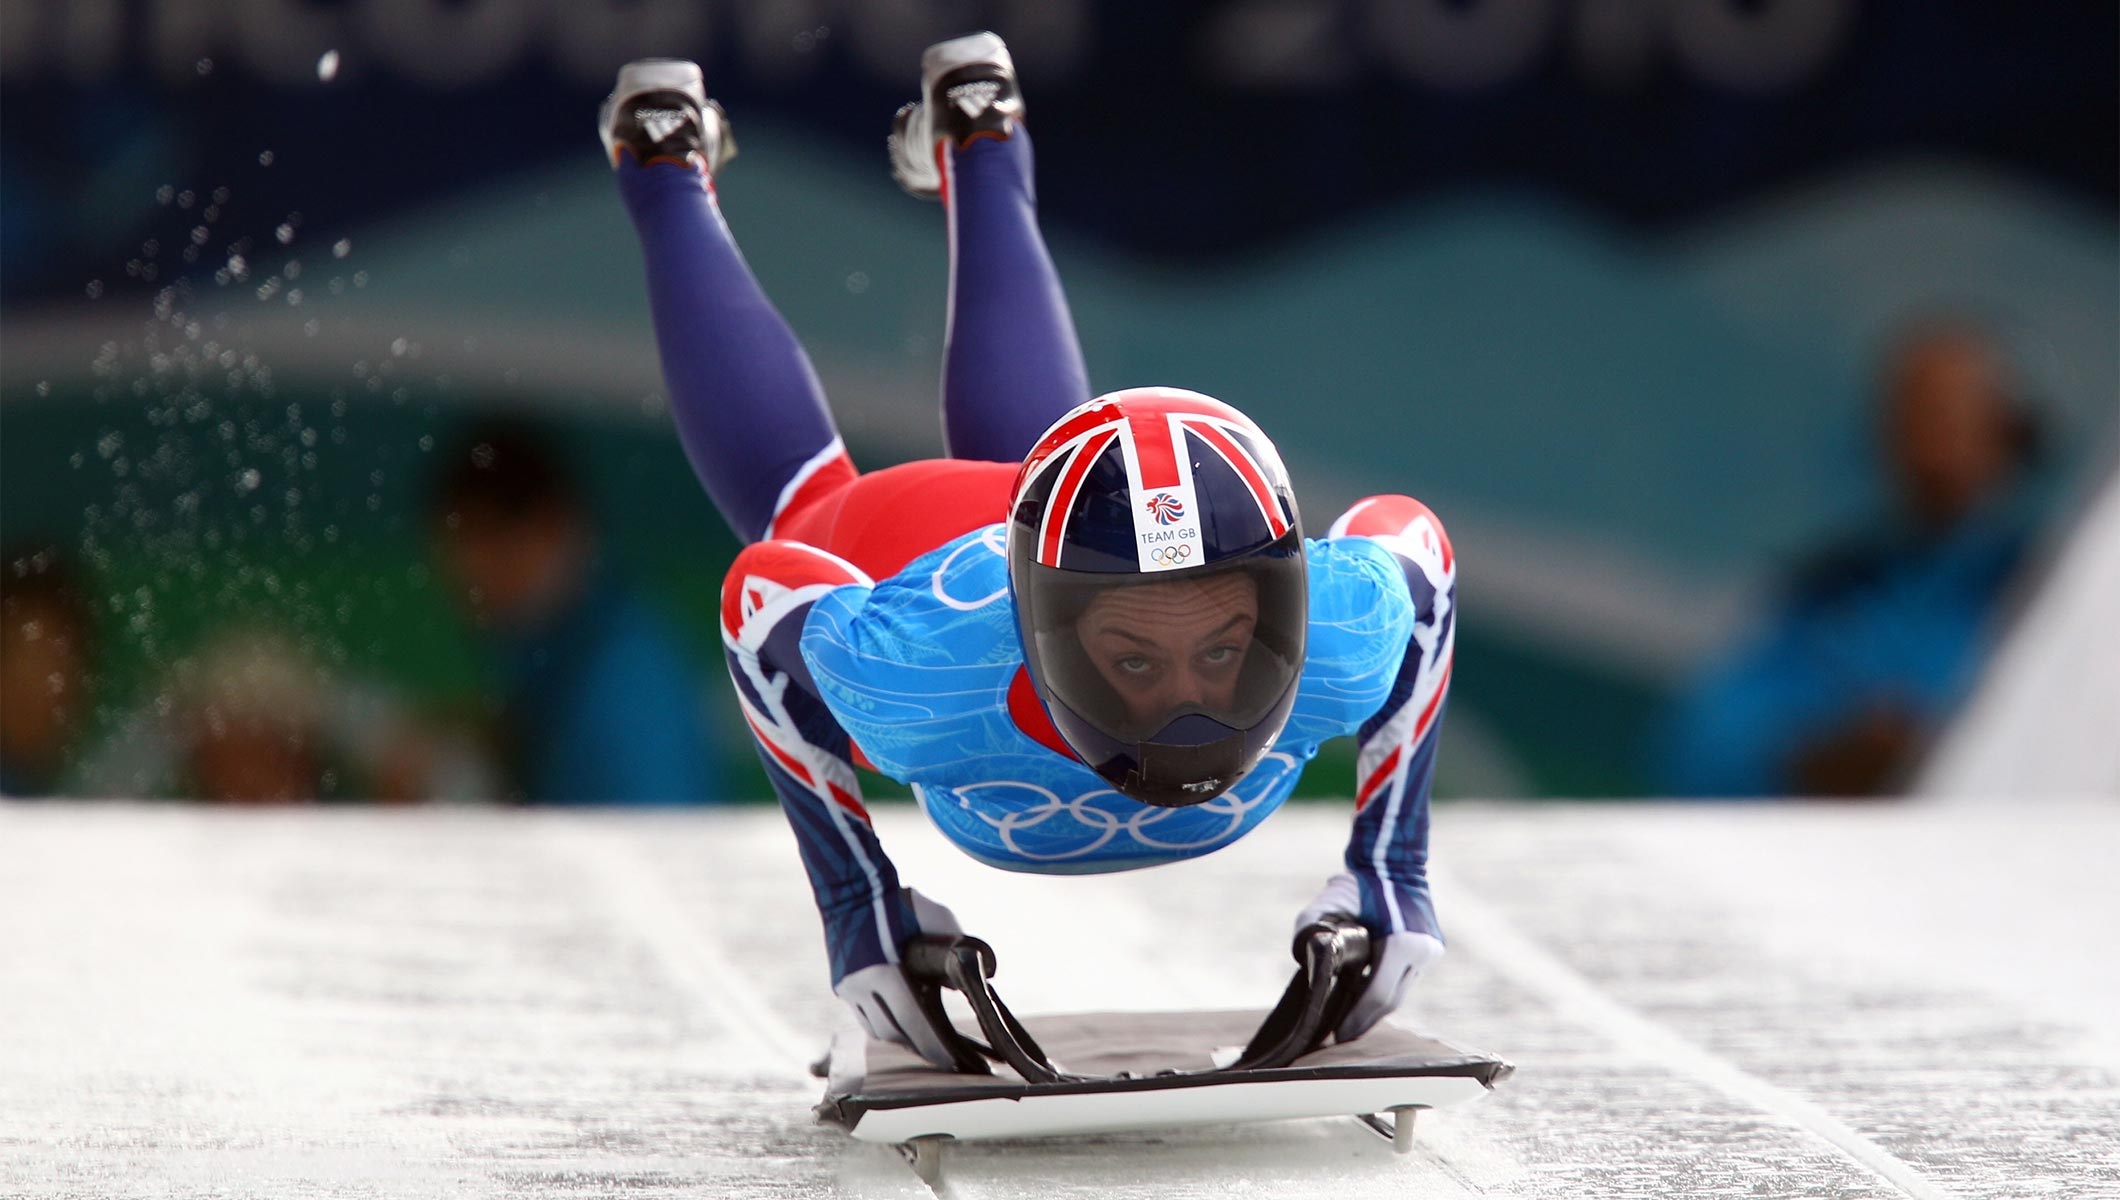 Sledding: Team GB, Winter Competitive Sliding Sport on the Sleds, Olympic Britain Athlete during Championship. 2120x1200 HD Wallpaper.